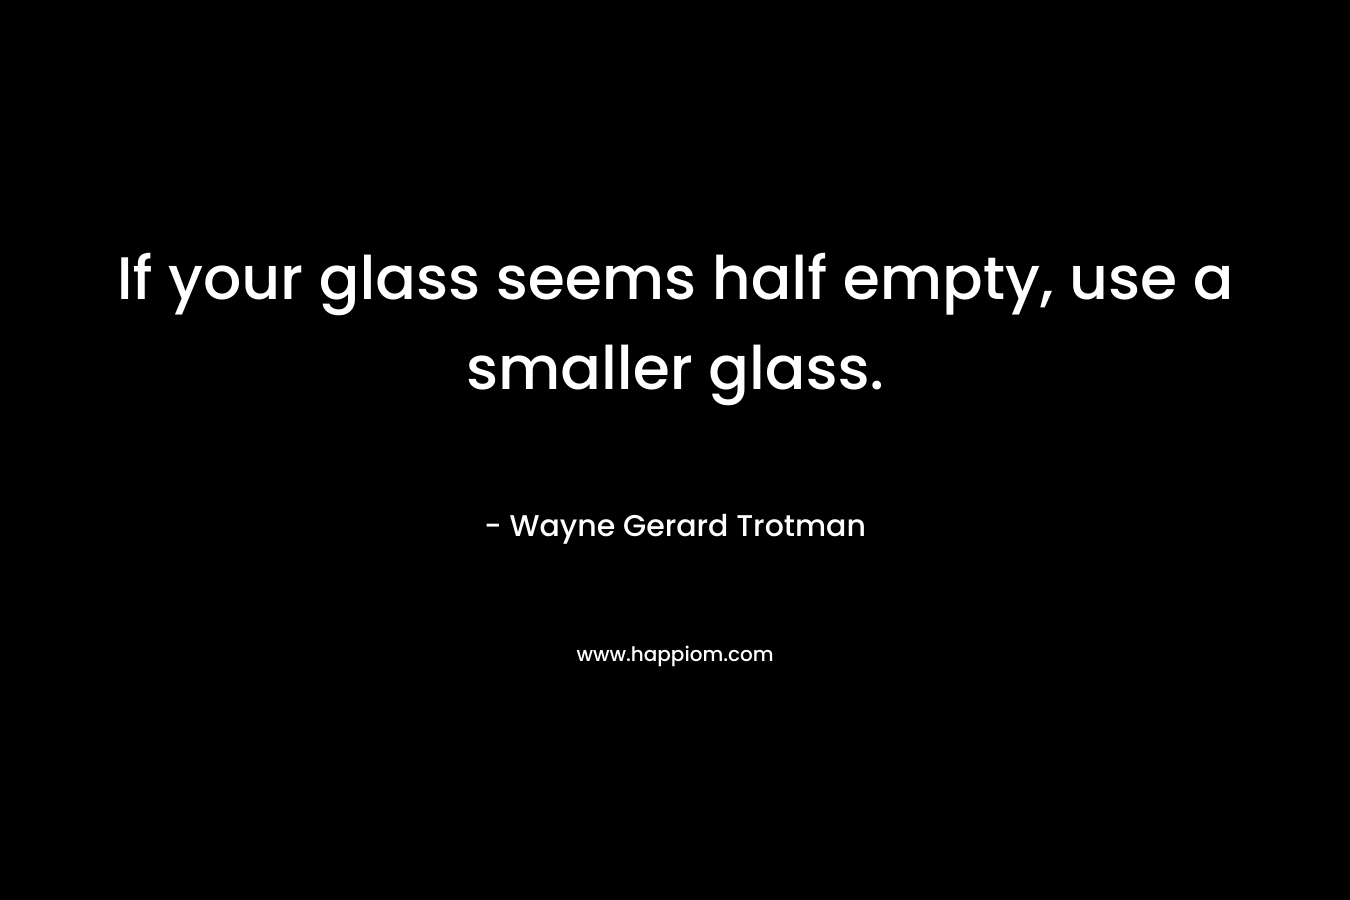 If your glass seems half empty, use a smaller glass.